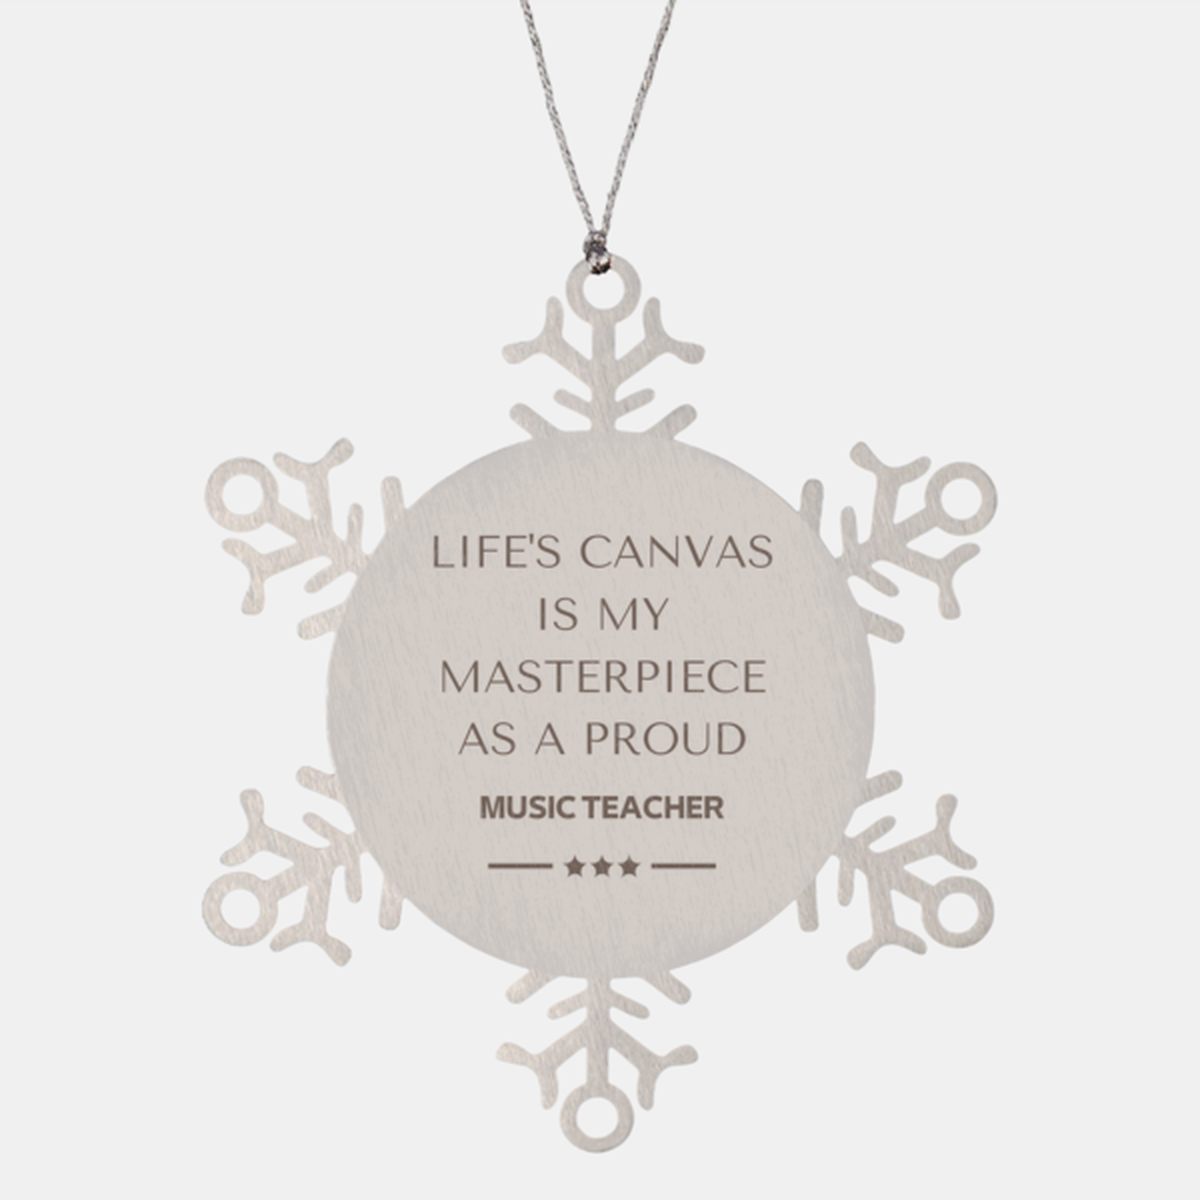 Proud Music Teacher Gifts, Life's canvas is my masterpiece, Epic Birthday Christmas Unique Snowflake Ornament For Music Teacher, Coworkers, Men, Women, Friends